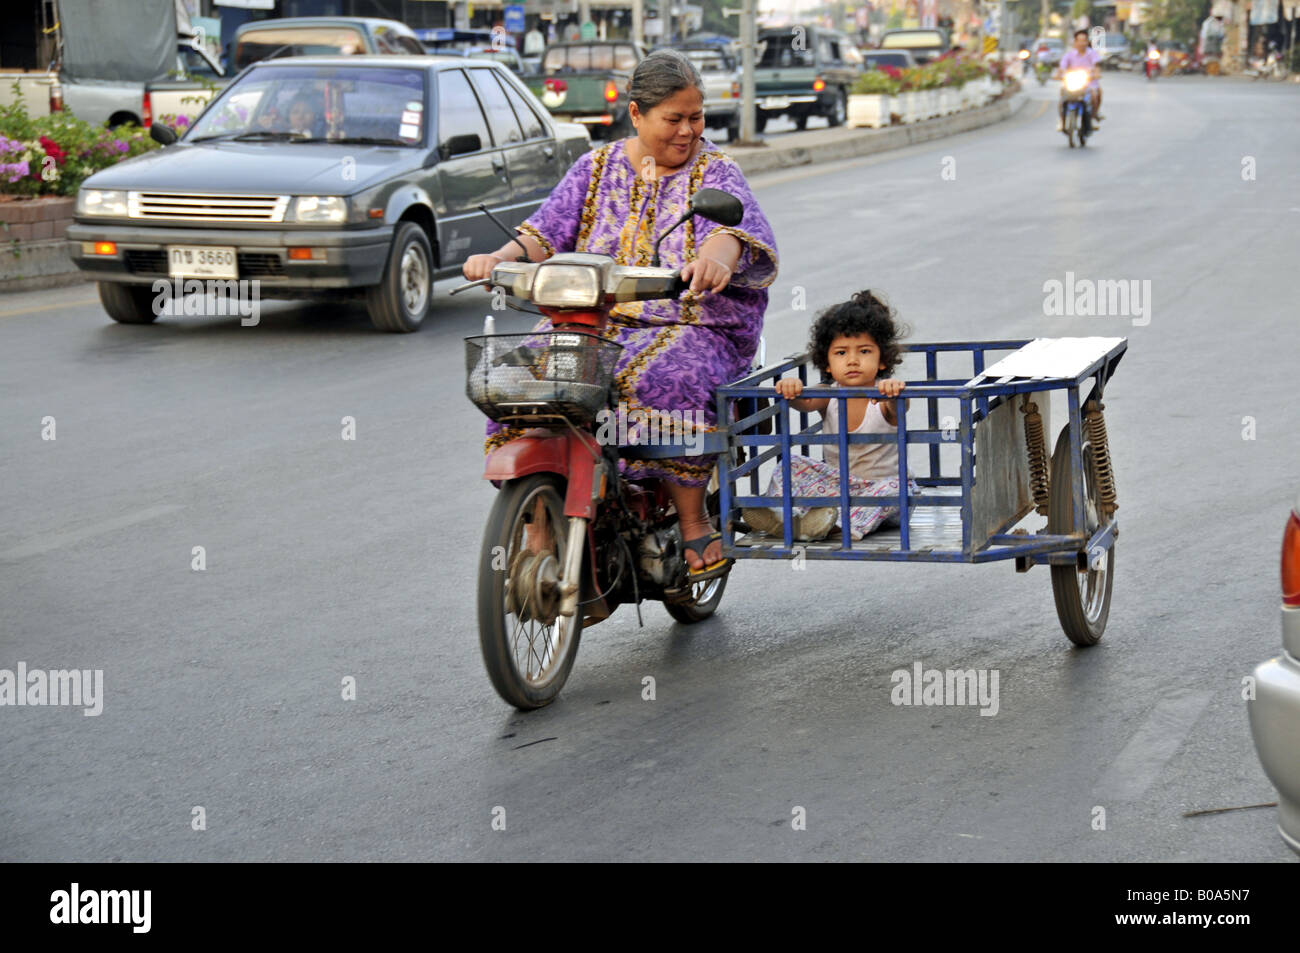 Thai woman on a motorbike with child in the sidecar, Thailand, Sukhothai Stock Photo